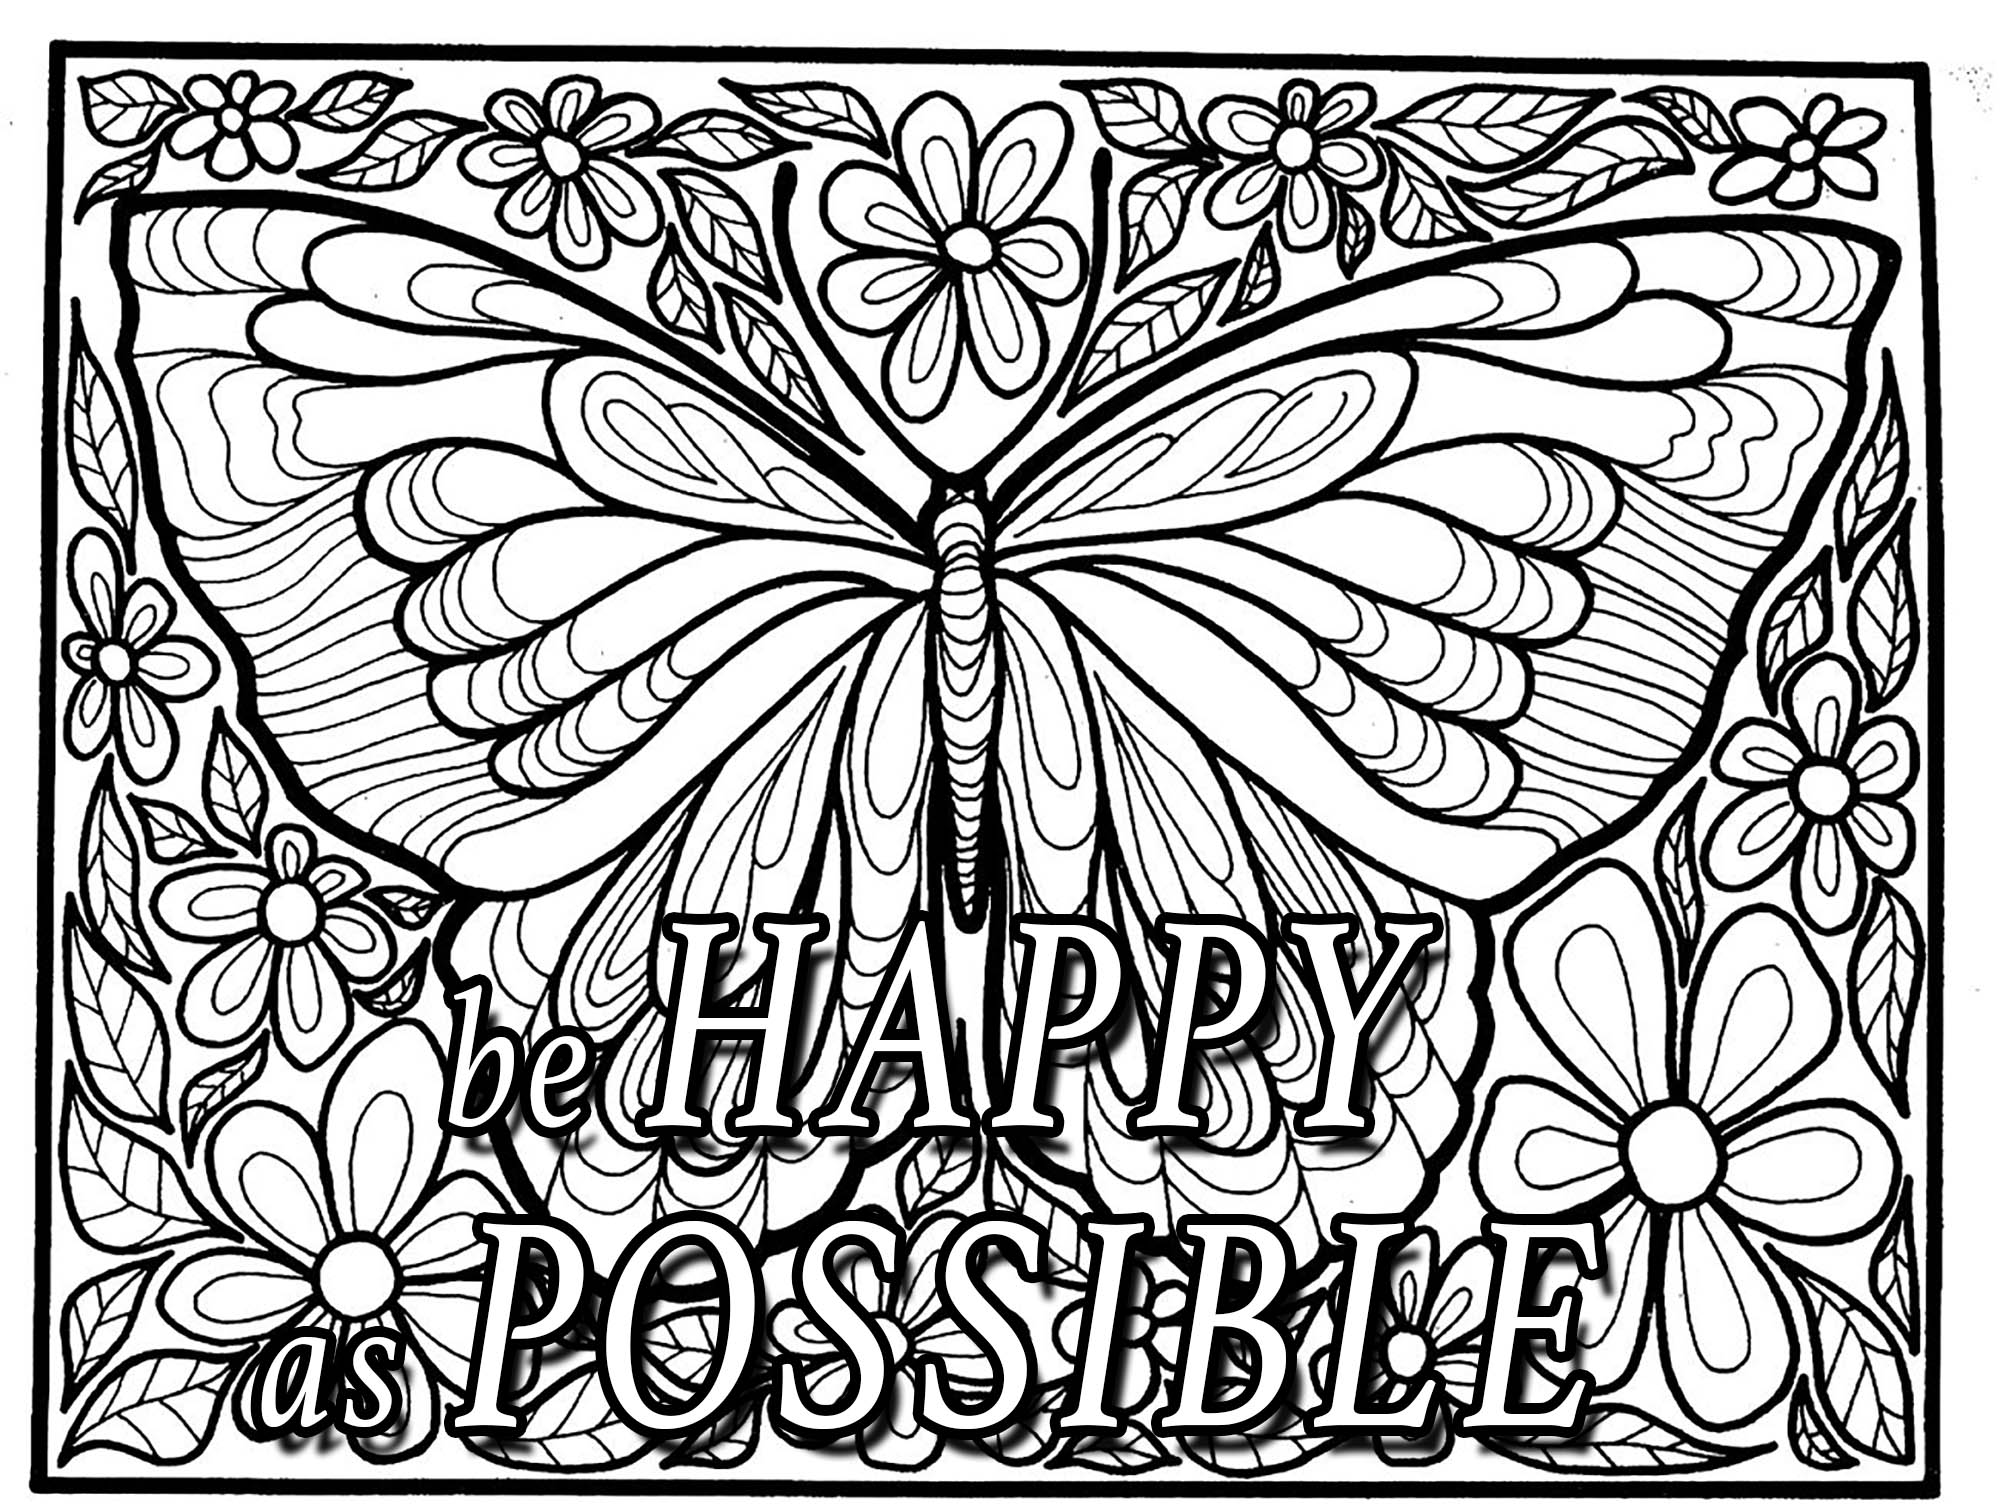 'Be Happy as Possible' : Quote to color with a butterfly, flowers and leaves